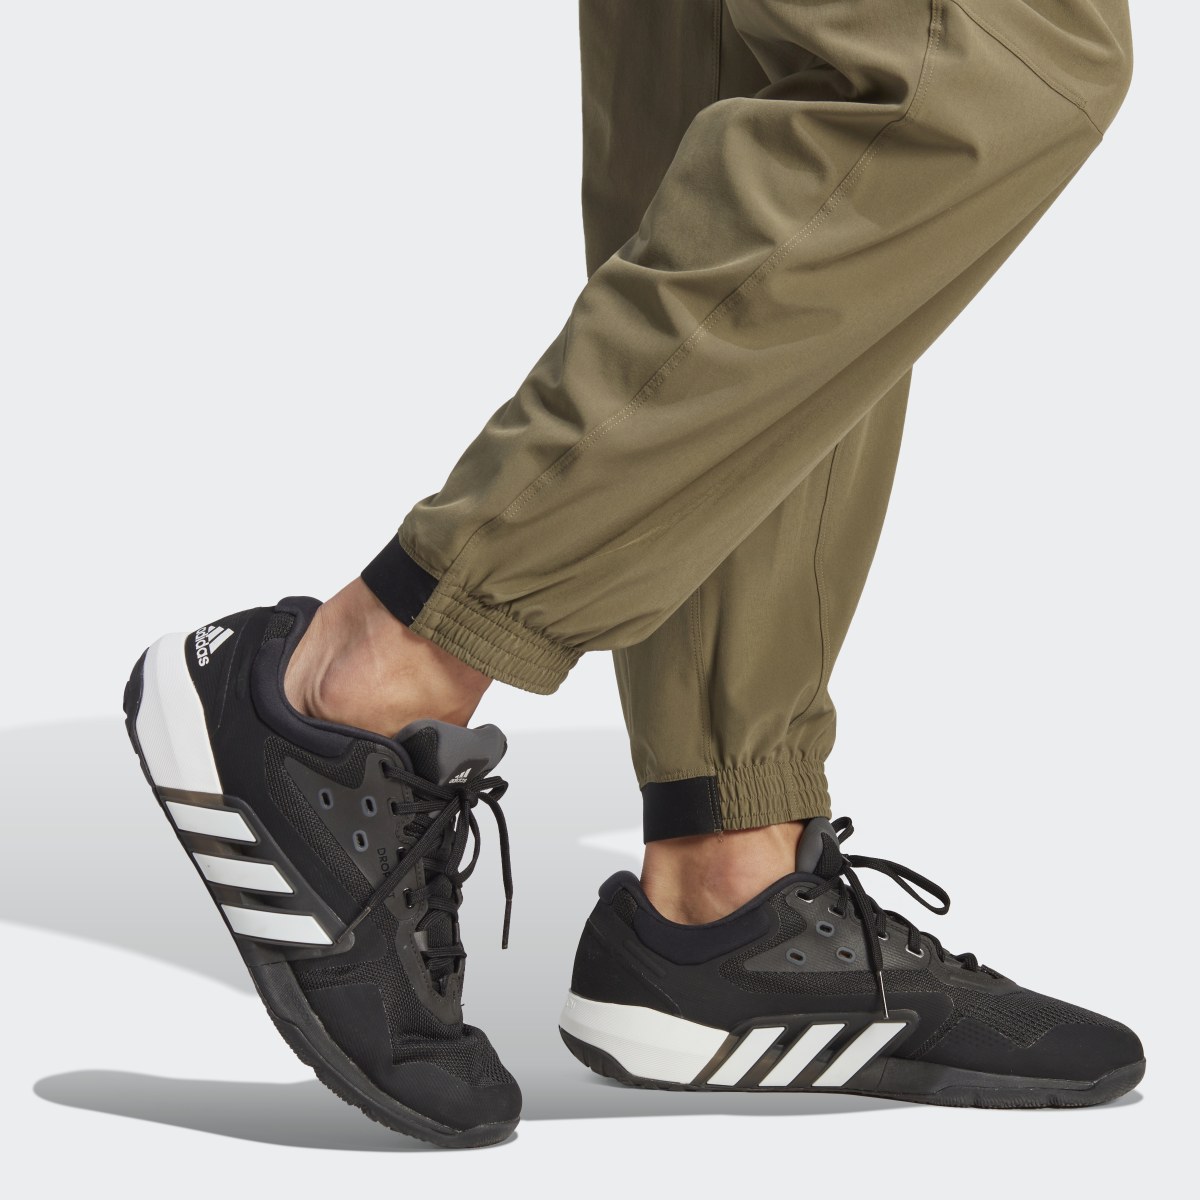 Adidas Designed for Training Pro Series Strength Joggers. 8